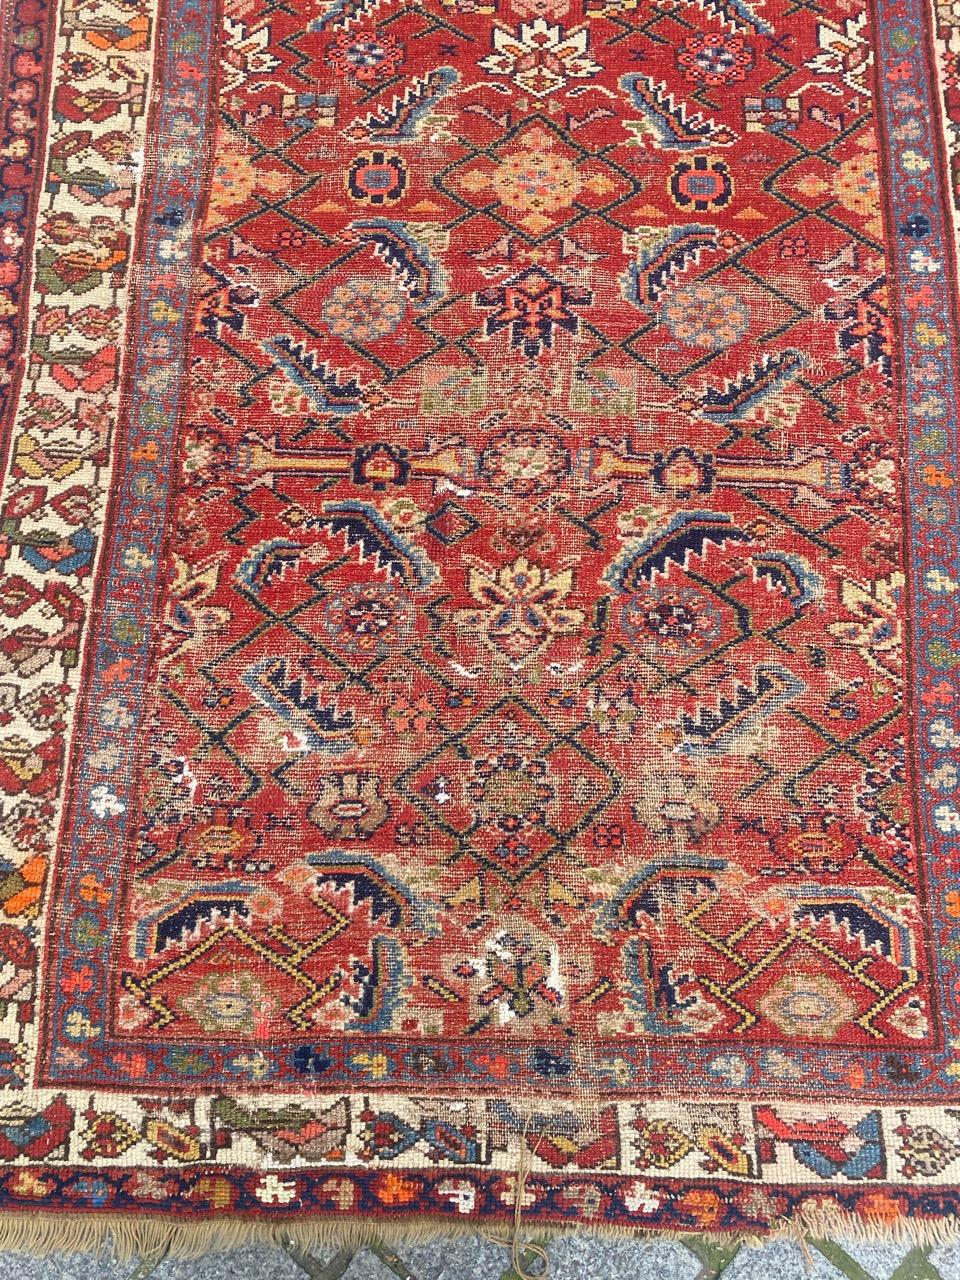 Nice 19th century north western rug with beautiful herati design and nice natural colors, entirely hand knotted with wool velvet on wool foundation.

✨✨✨
